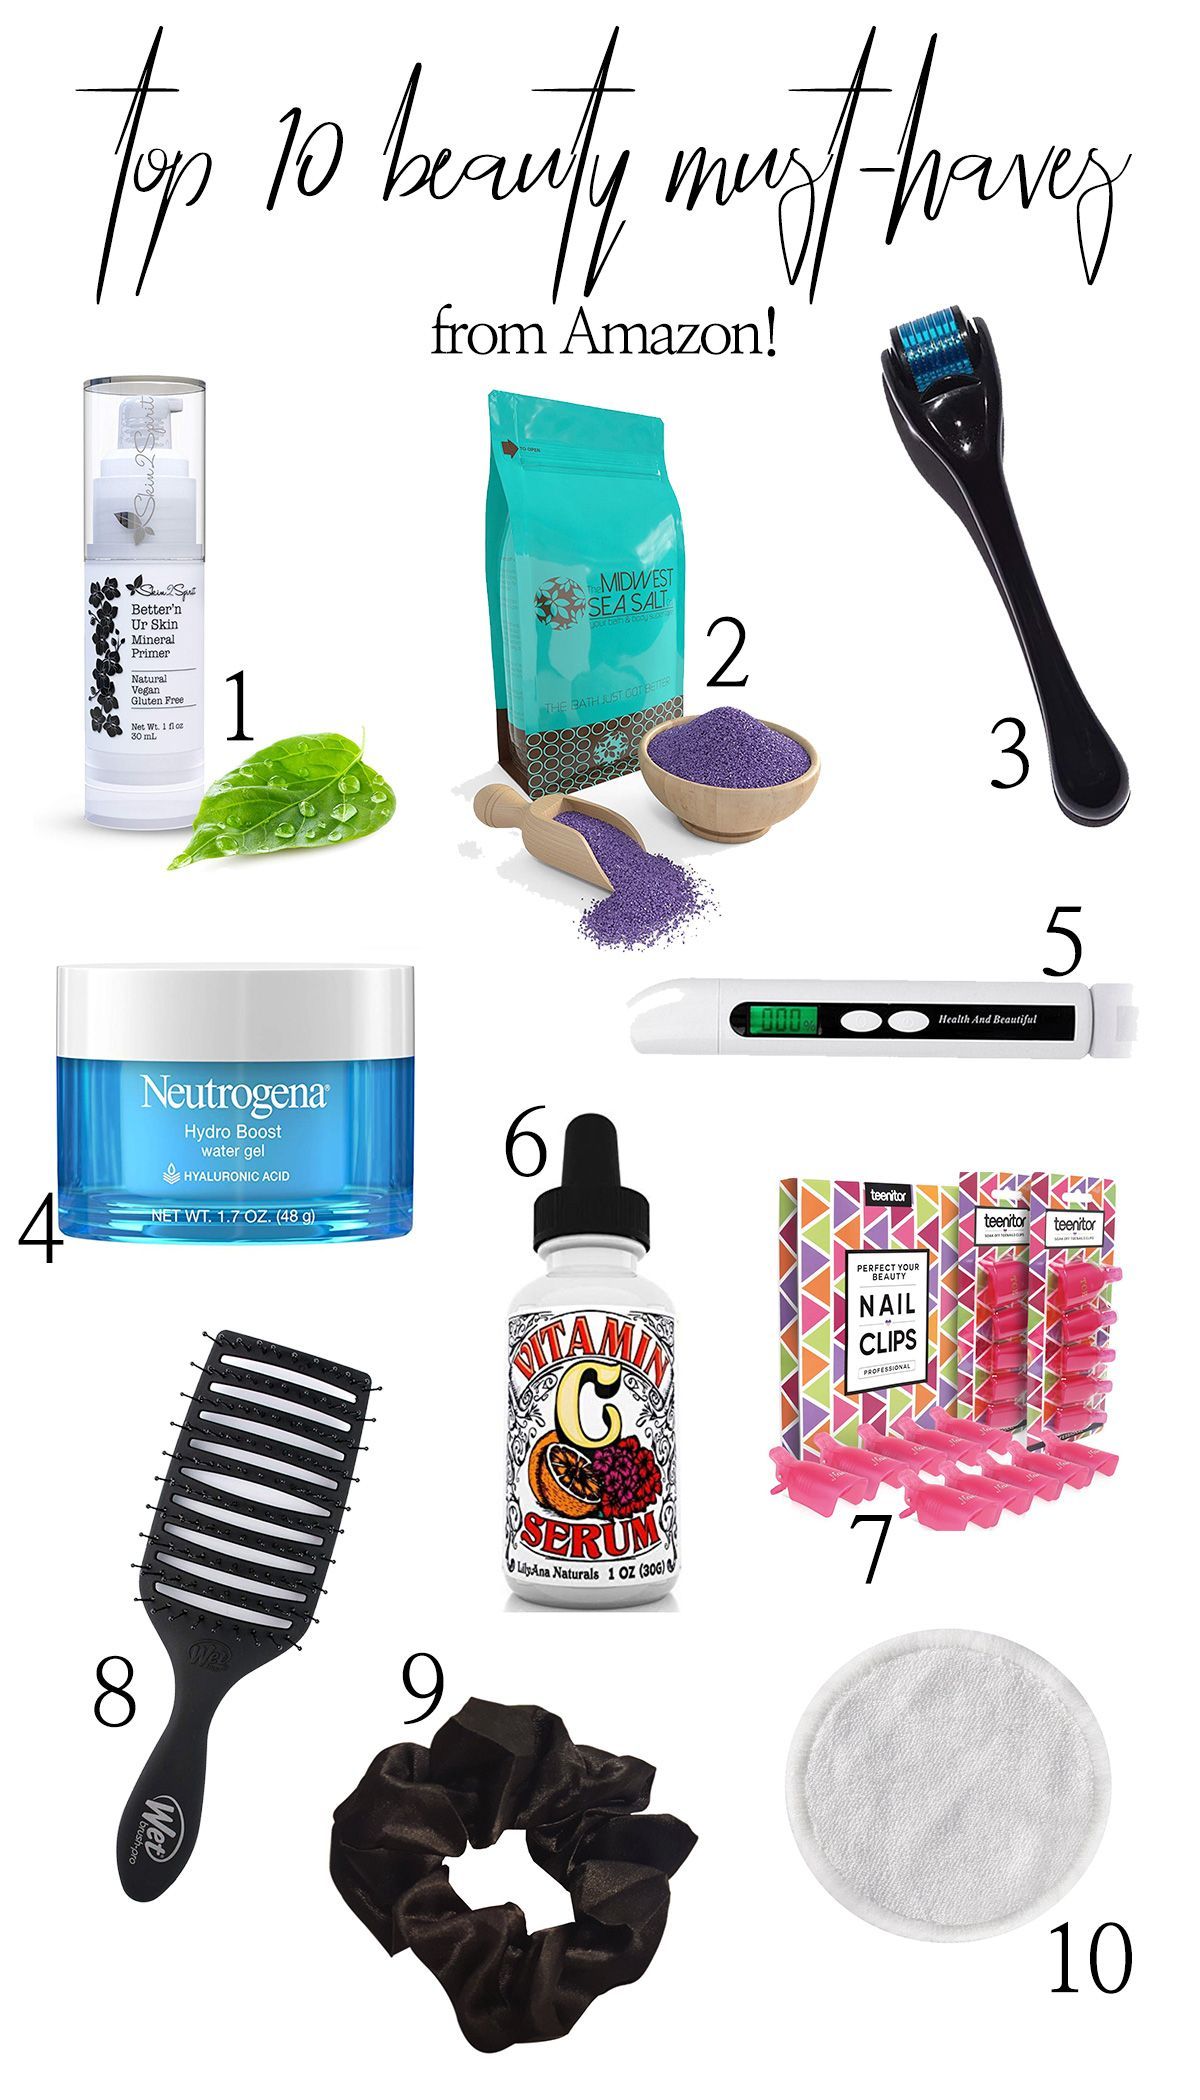 My Top 10 Must-Have Amazon Beauty Products - The Charming Detroiter - My Top 10 Must-Have Amazon Beauty Products - The Charming Detroiter -   15 beauty Products online ideas